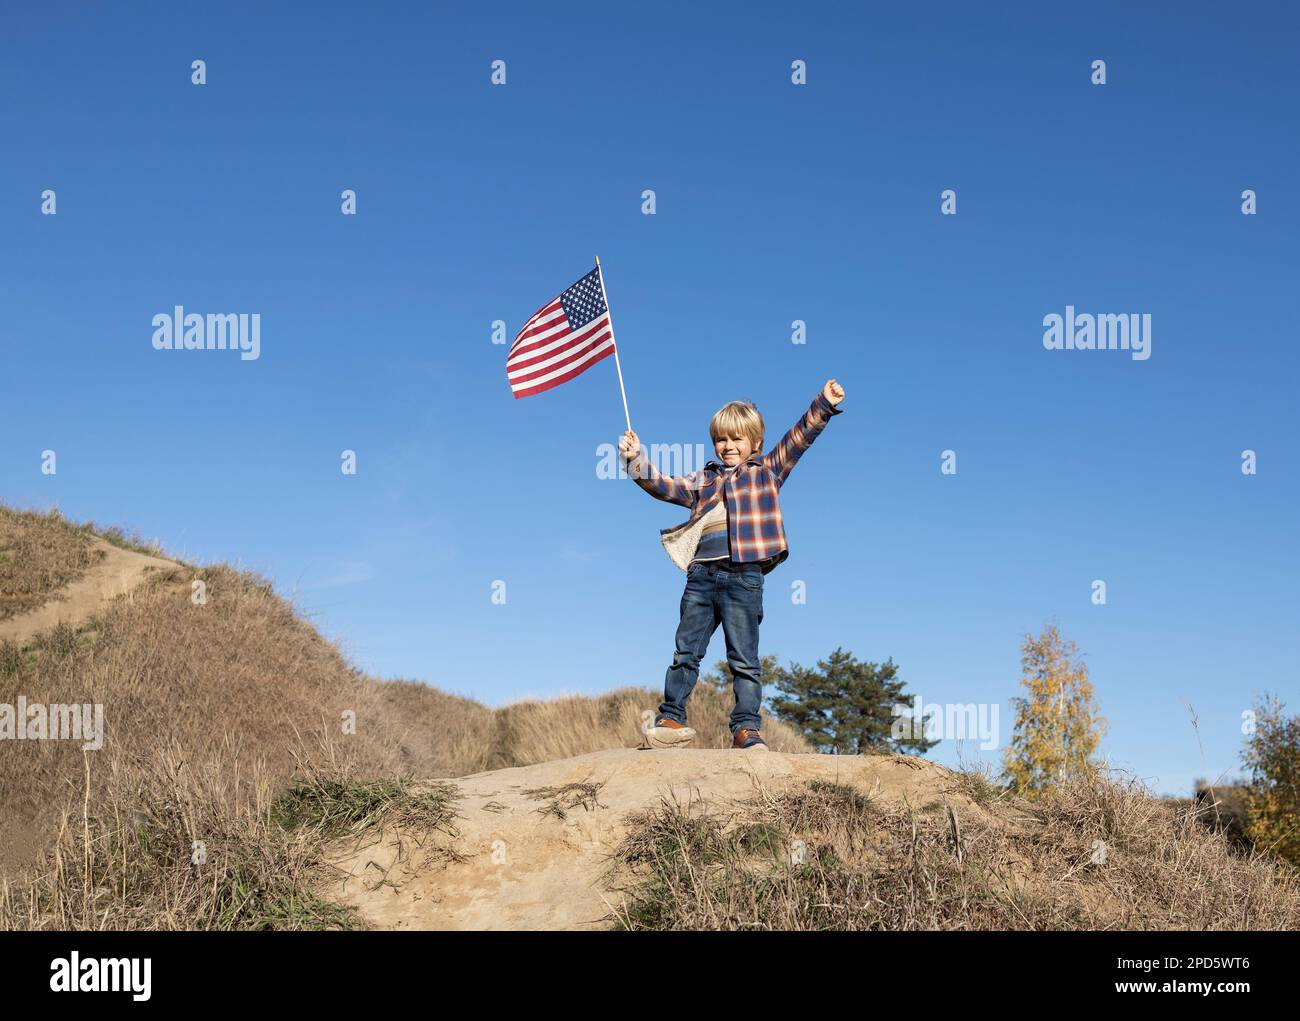 Patriotic boy 6 years old raised up hands holding the American flag against blue sky. Celebrate Independence Day of the United States of America. Prid Stock Photo